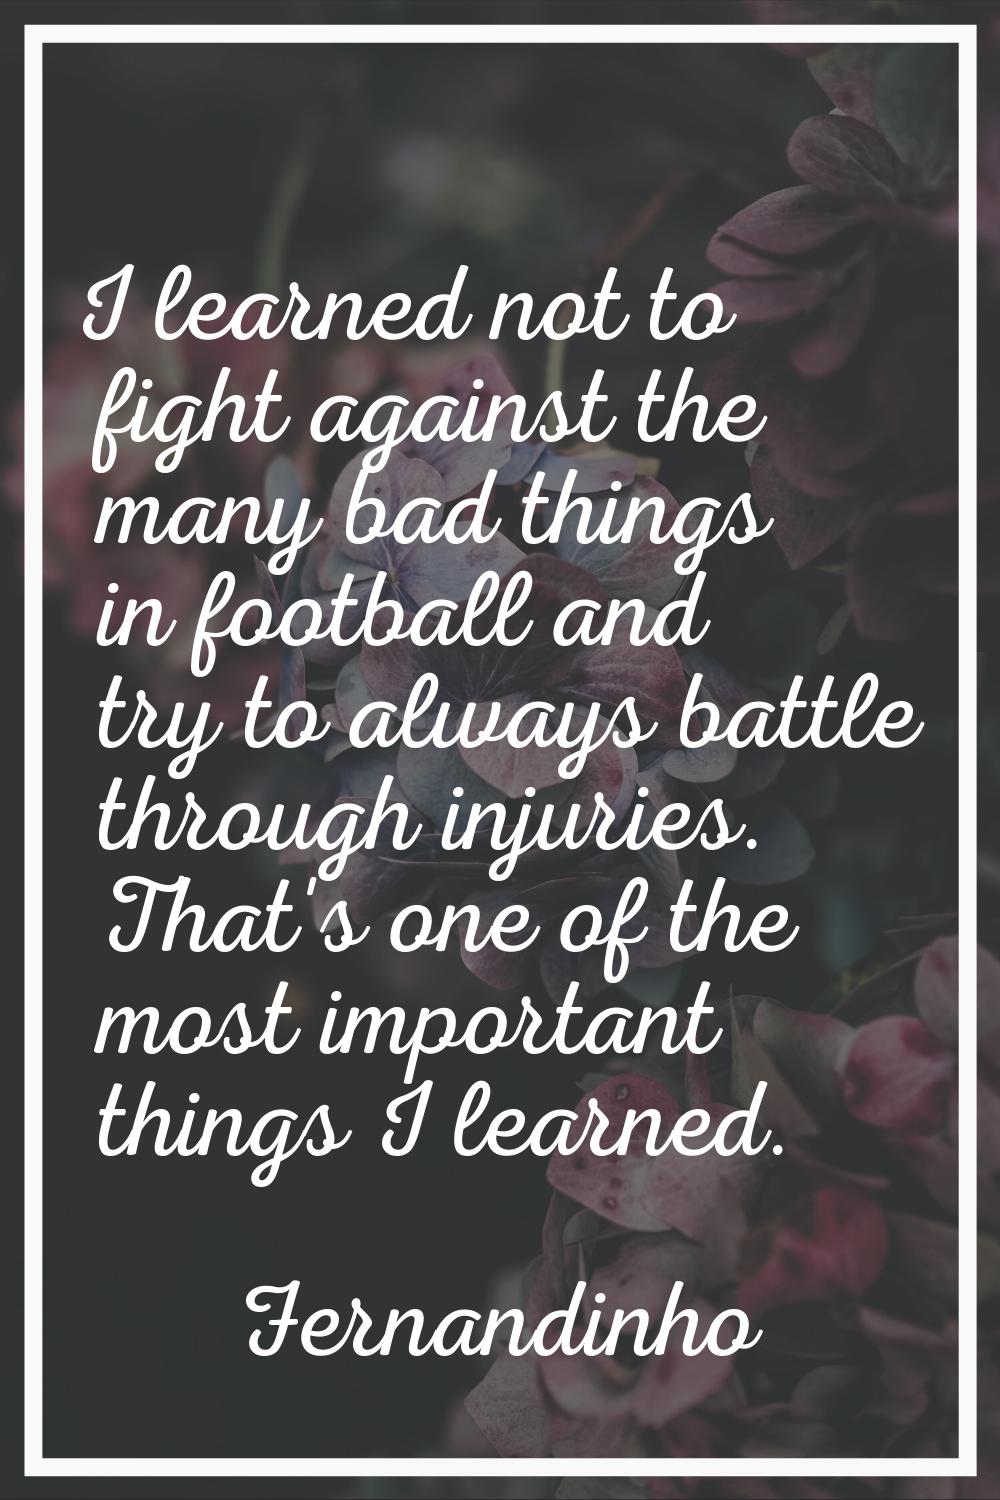 I learned not to fight against the many bad things in football and try to always battle through inj